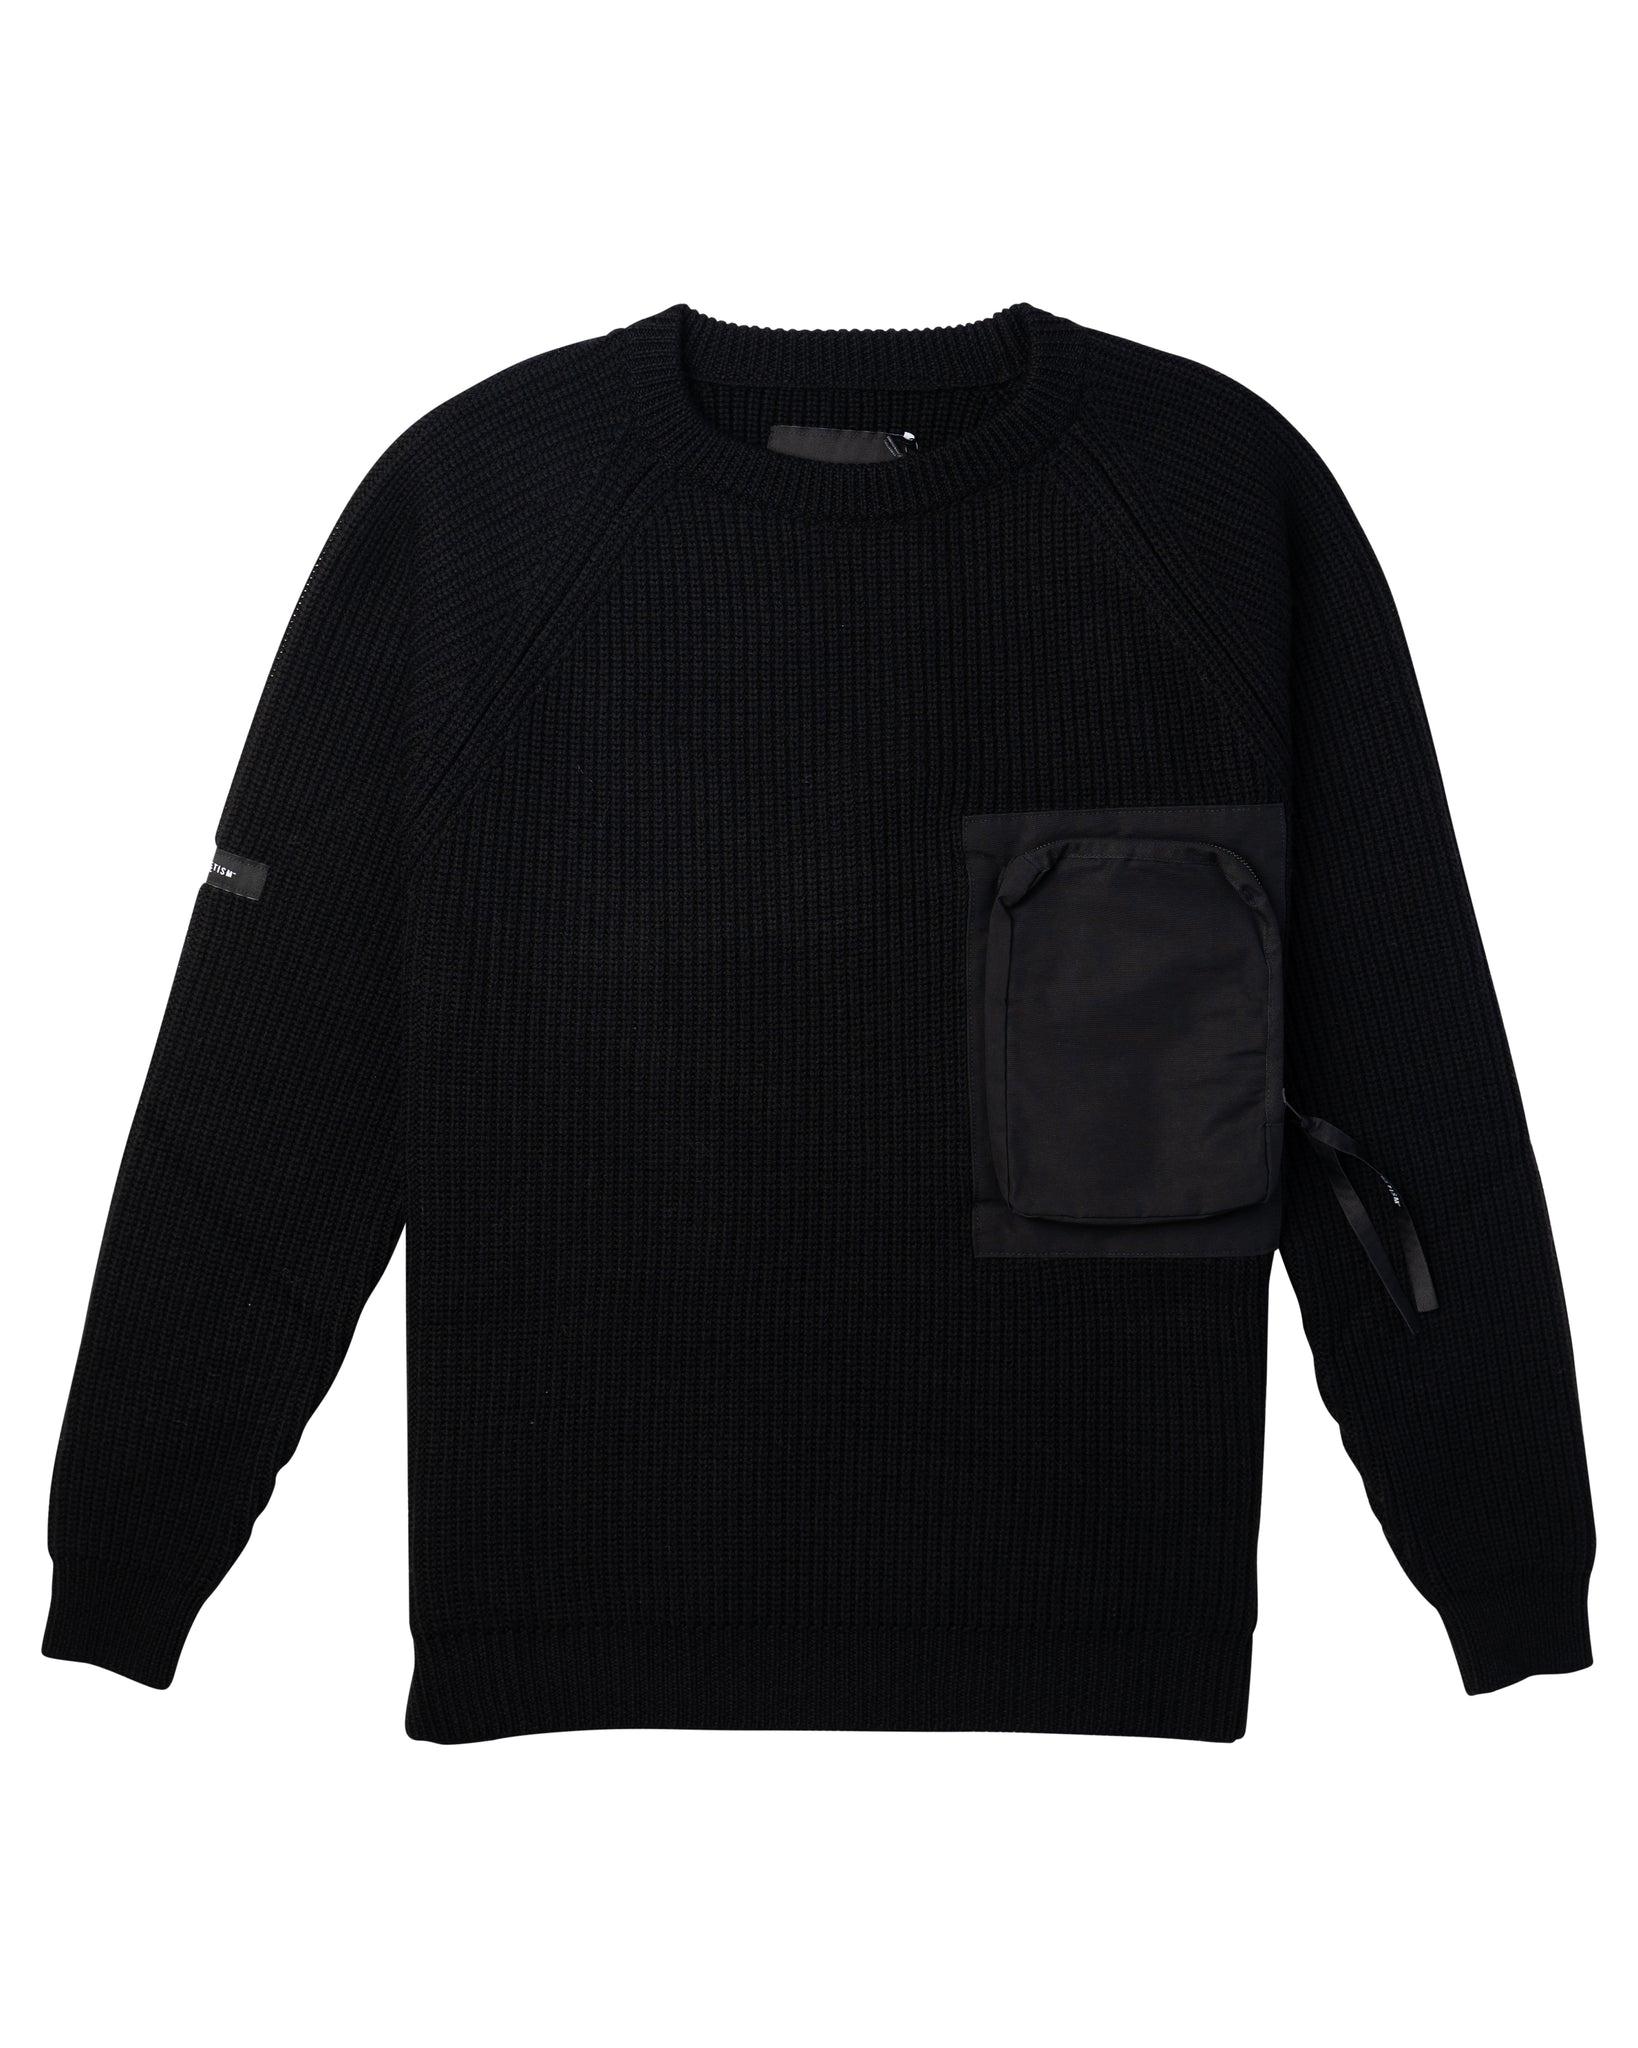 Tobias Birk Nielsen Knitted Sweater With Zipped Chest Pocket Black/Black